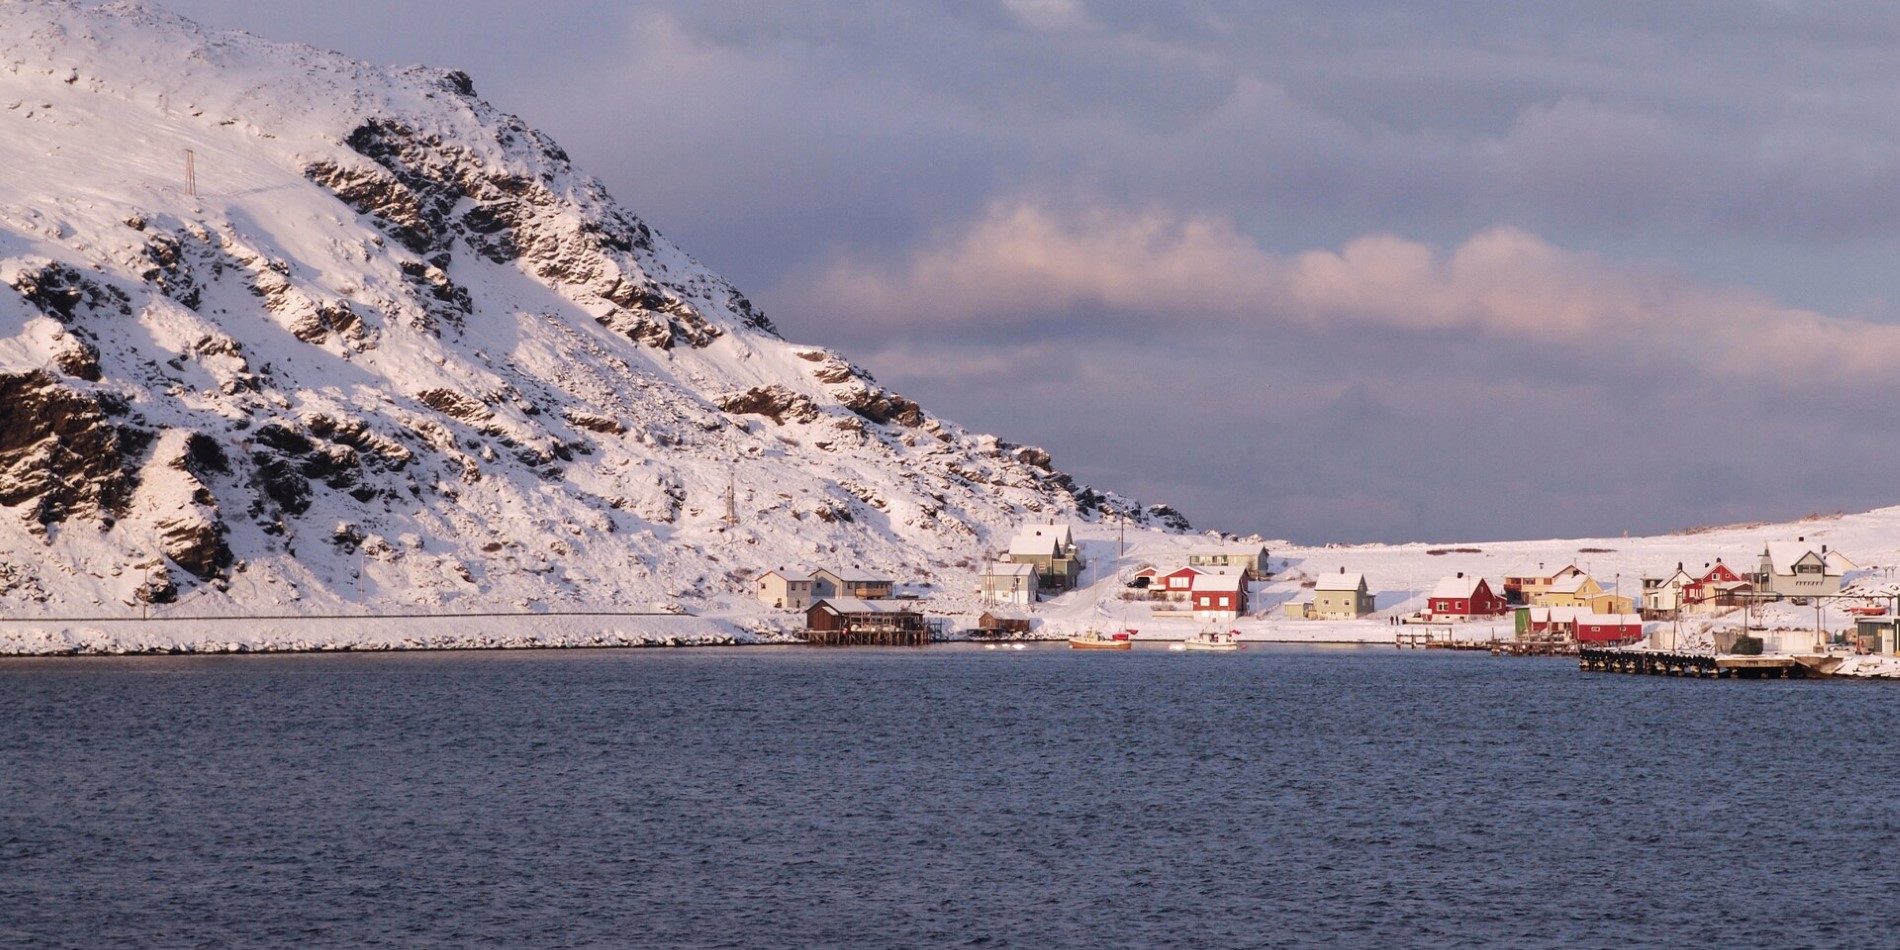 The small port of Havøysund in Norway covered in snow